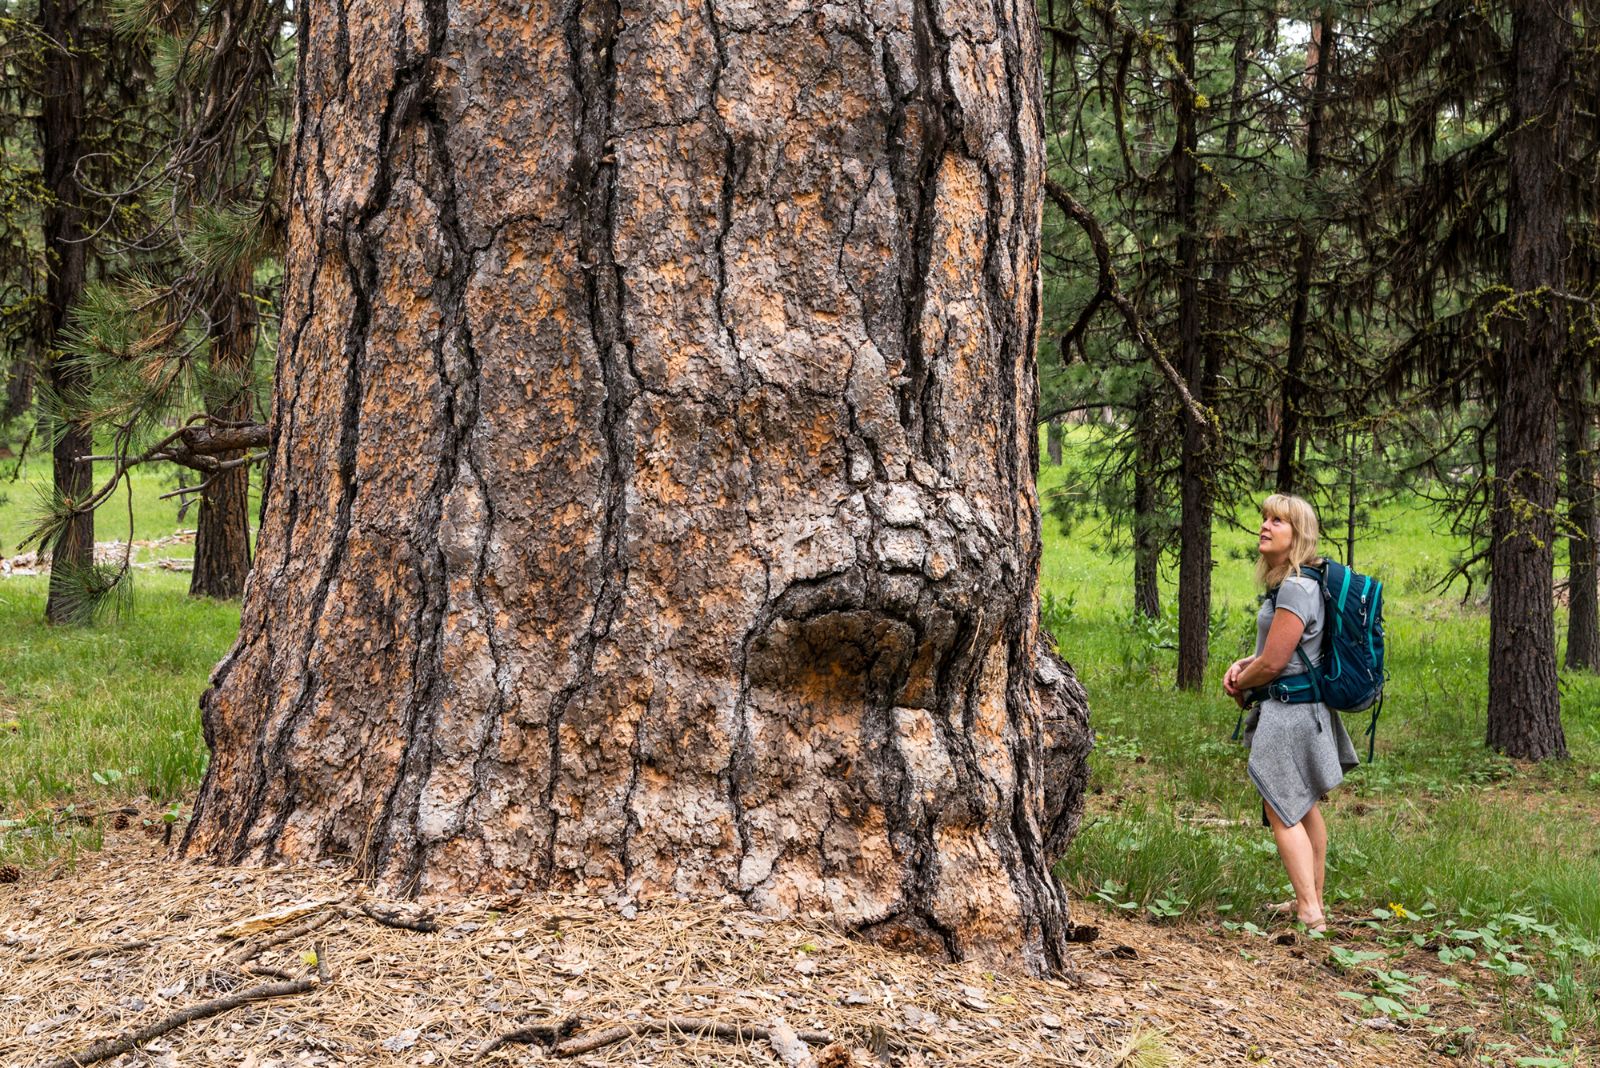 Woman looking up at old growth tree in Ochoco National Forest. Photo by Jim Davi